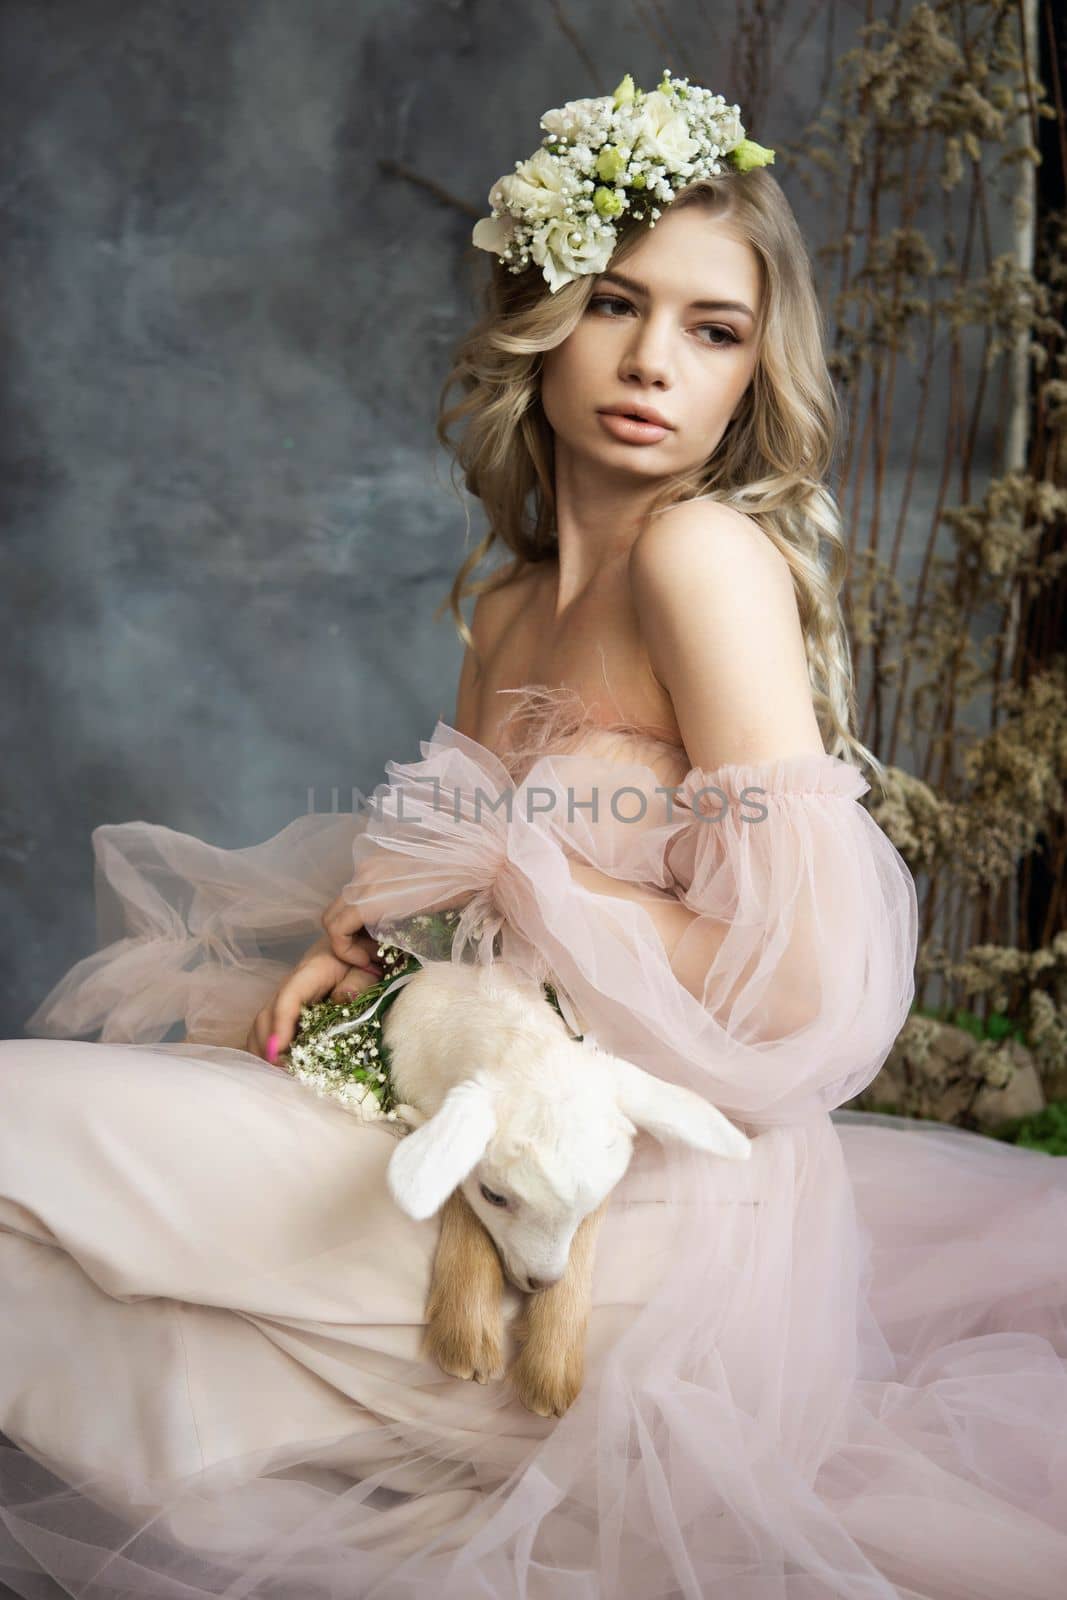 A young blonde woman in an airy pink dress with a white kid. Spring portrait of a woman. by Annu1tochka